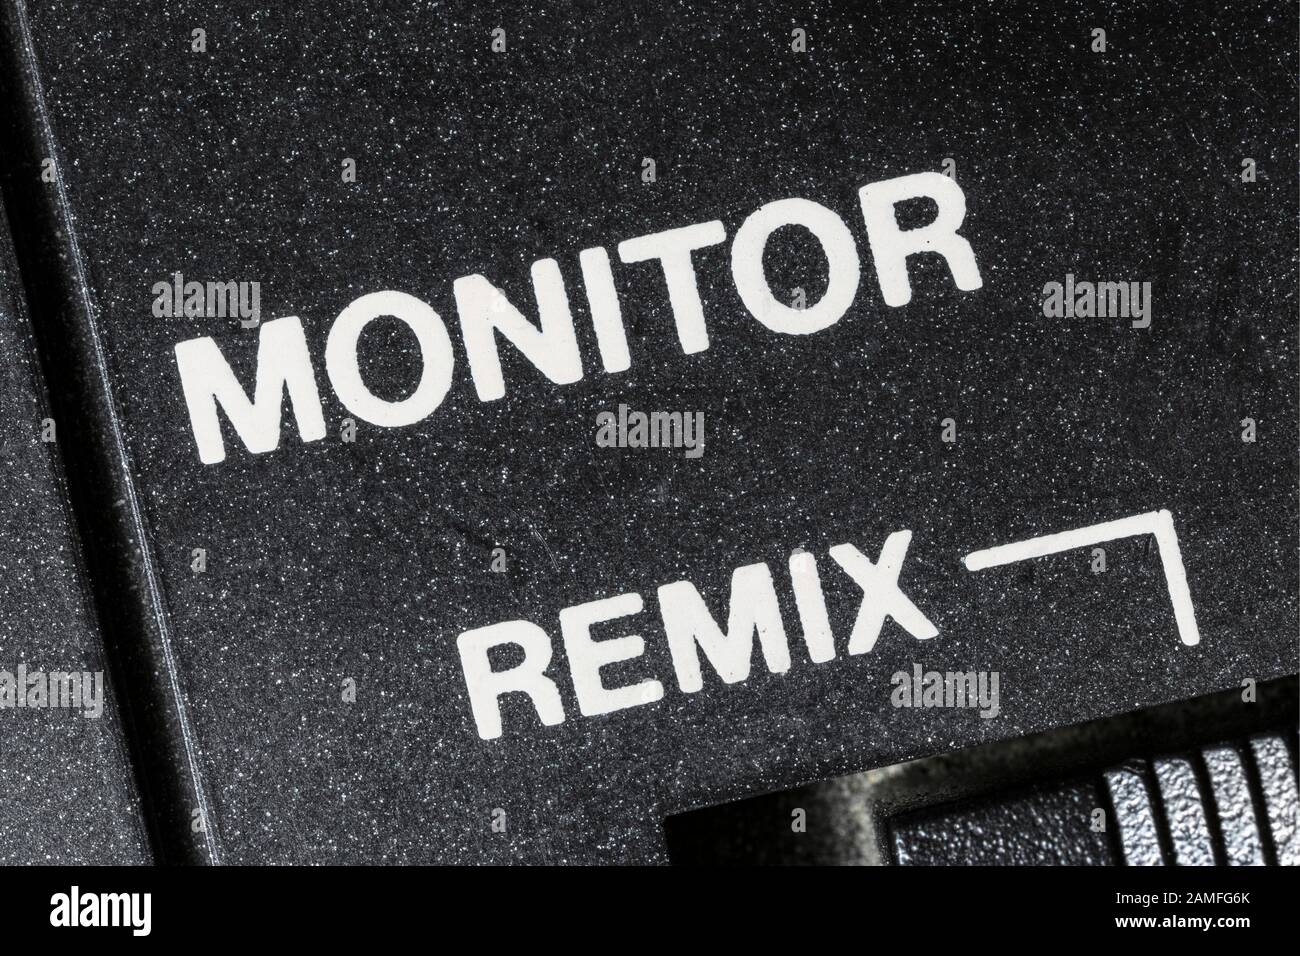 Macro close up photograph of vintage audio mixing board monitor remix control detail. Stock Photo